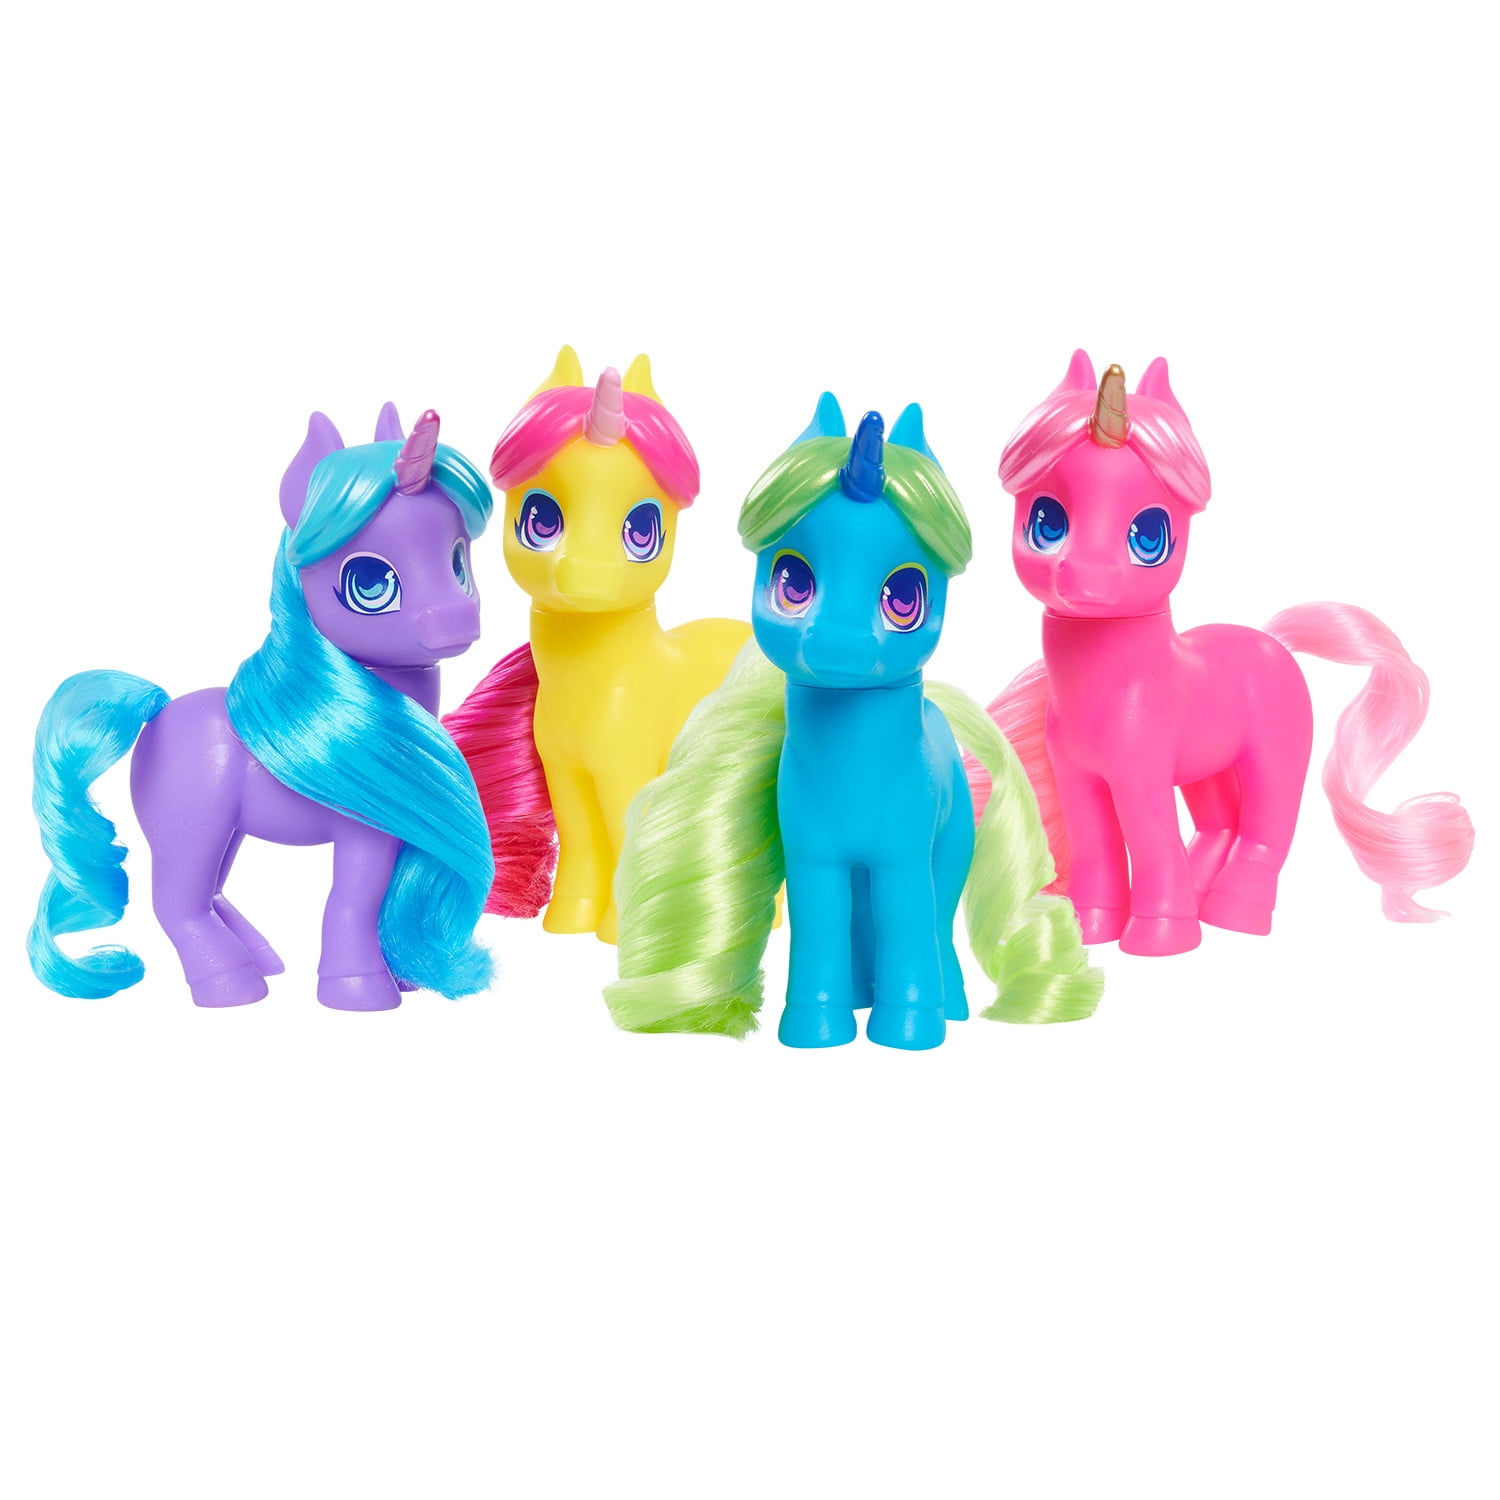 Hairmazing Fantasy Unicorns,  Kids Toys for Ages 3 Up, Gifts and Presents